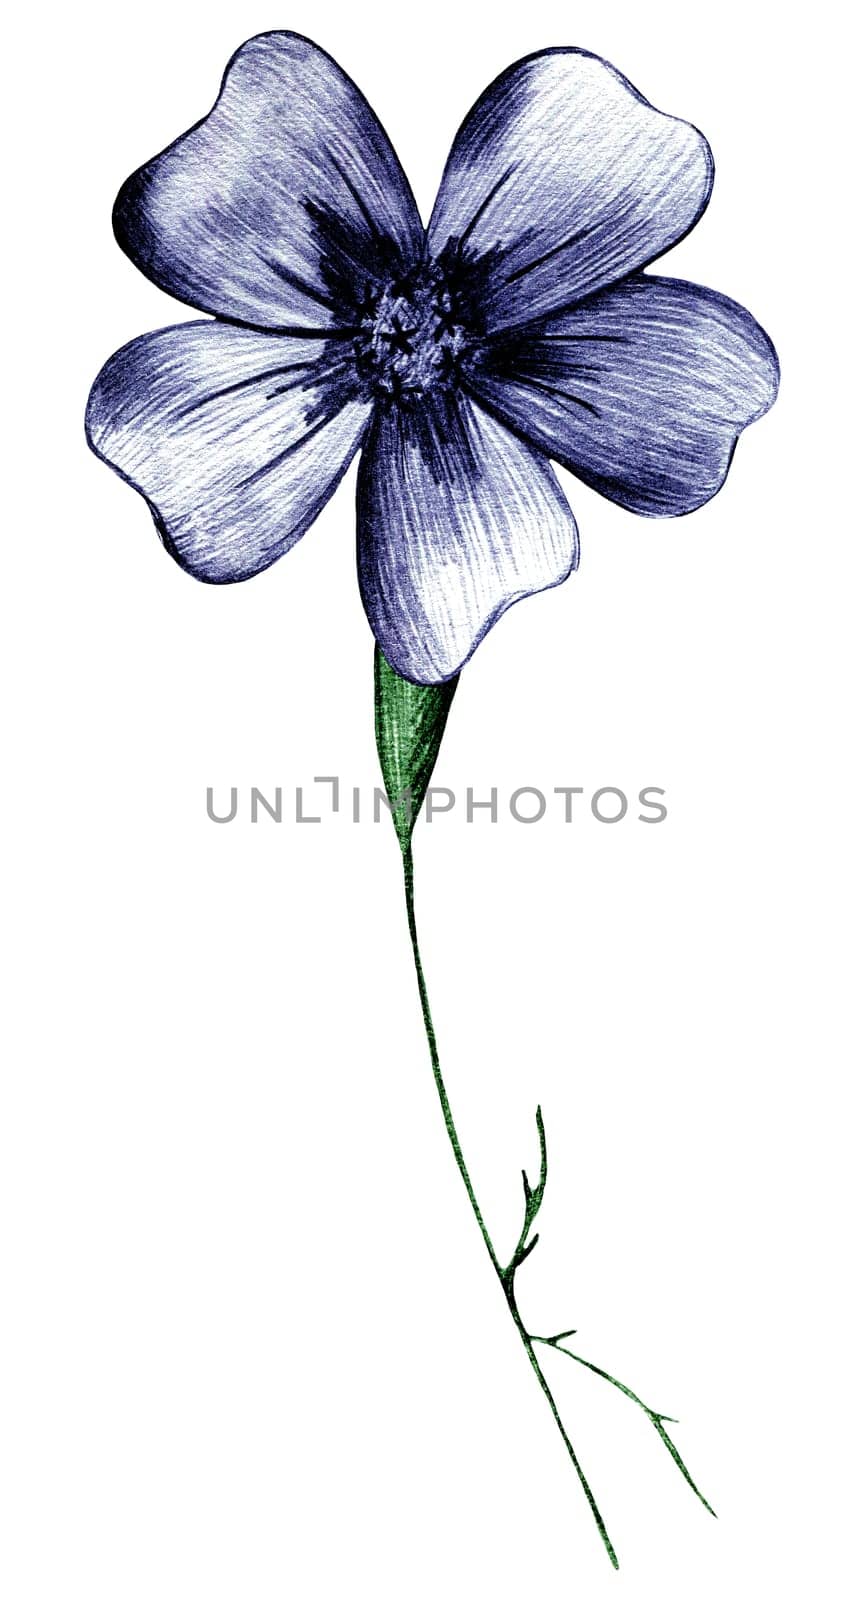 Blue Hand Drawn Marigold Flower Isolated on White Background. Marigold Flower Drawn by Pencil.